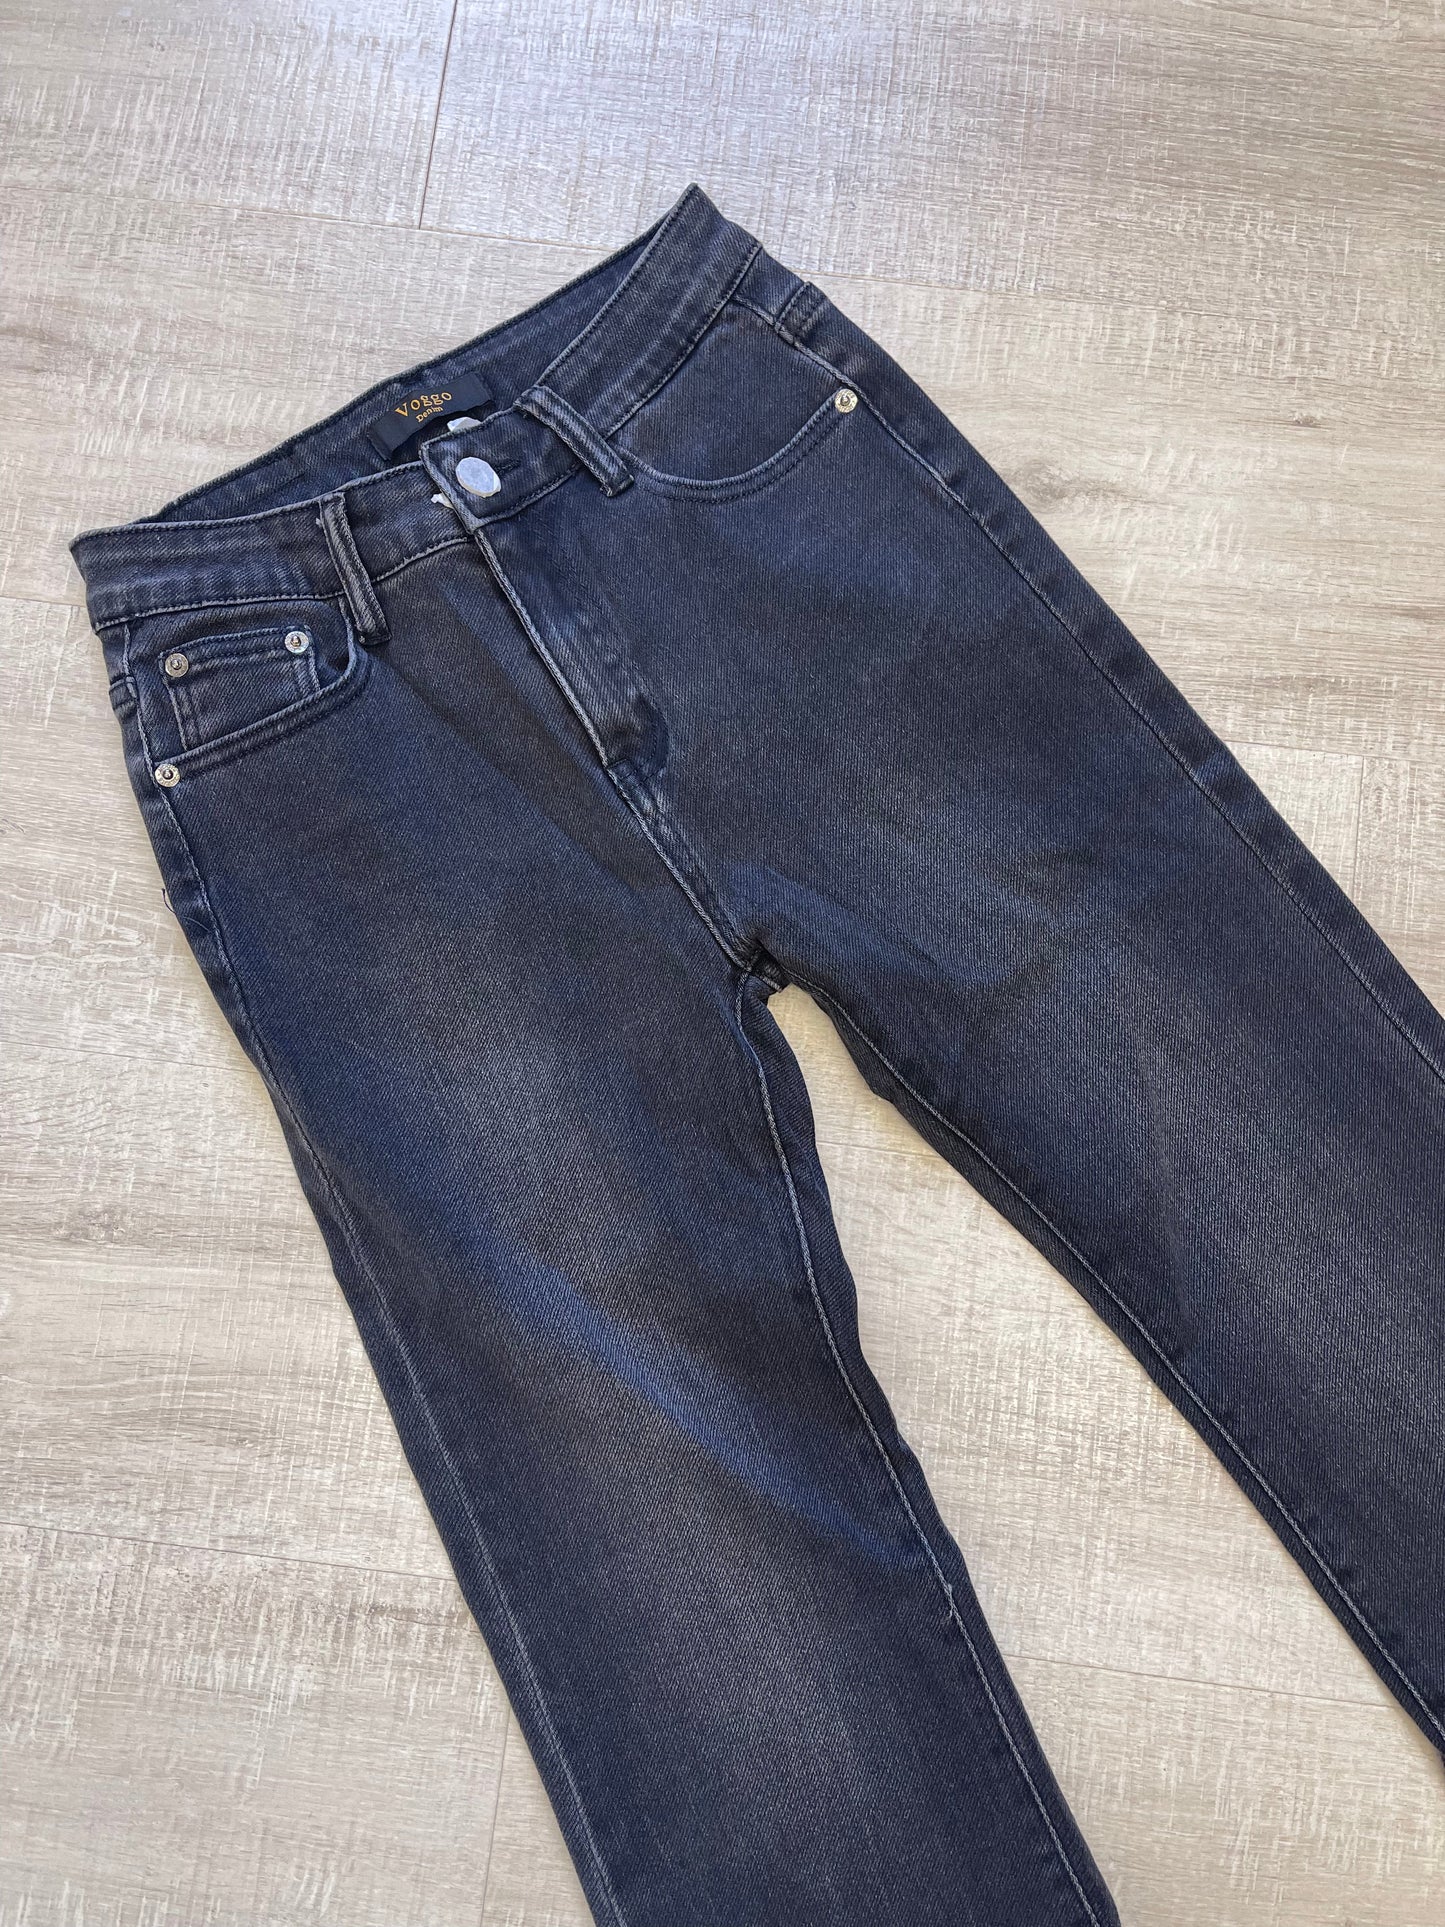 Washed black bootcut jeans sizes 8-16